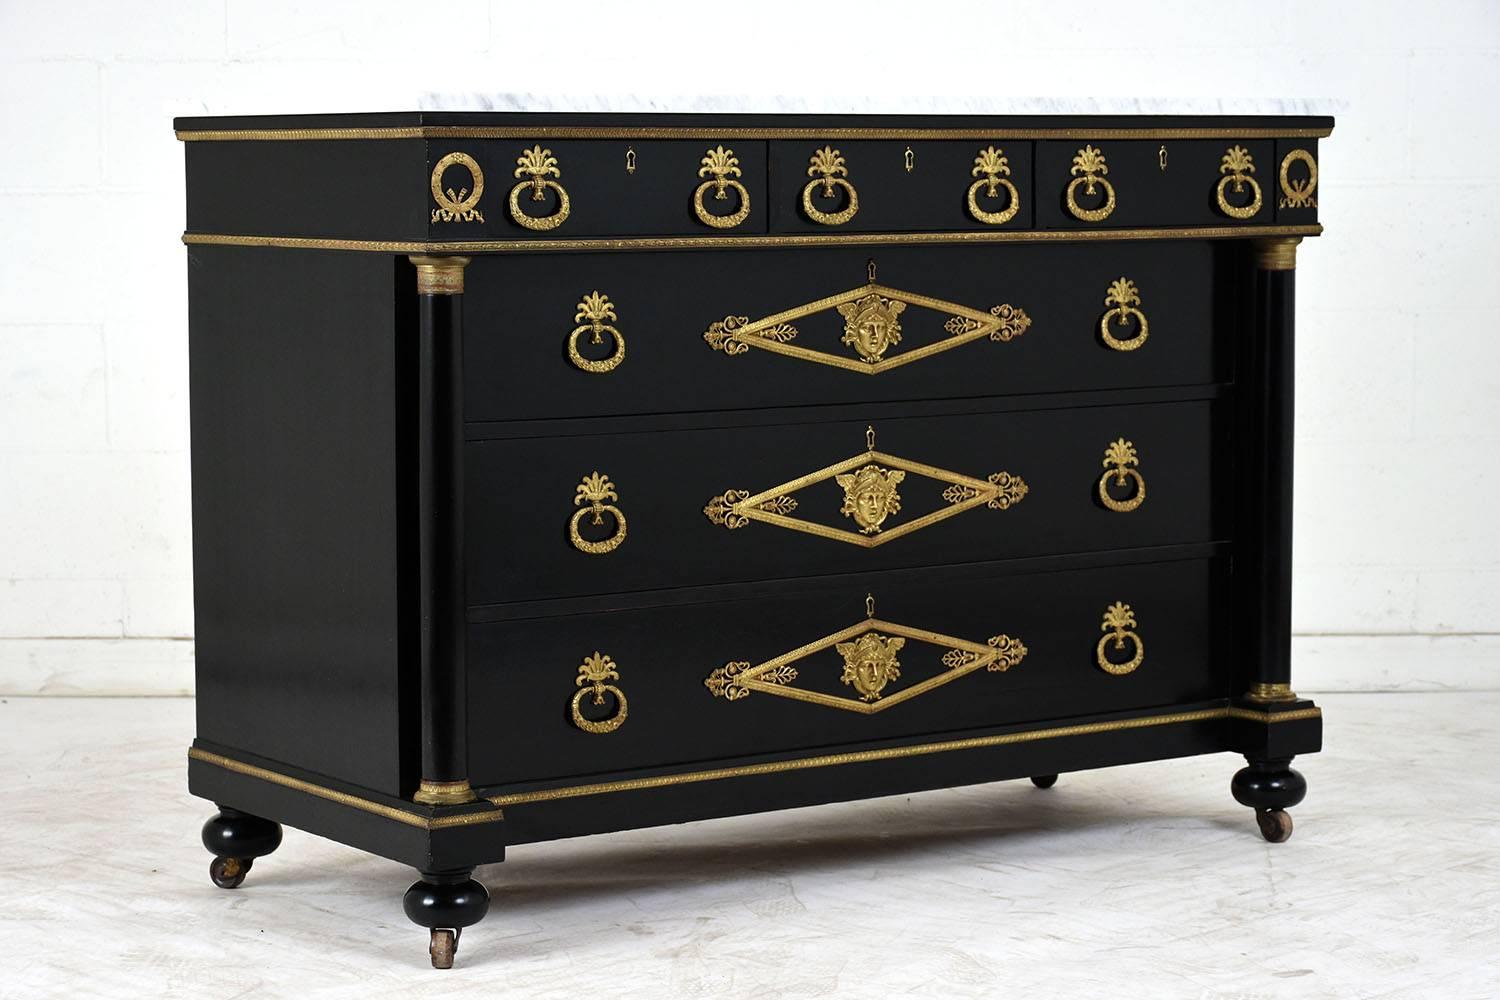 Carved French Empire-Style Chest of Drawers, circa 1900